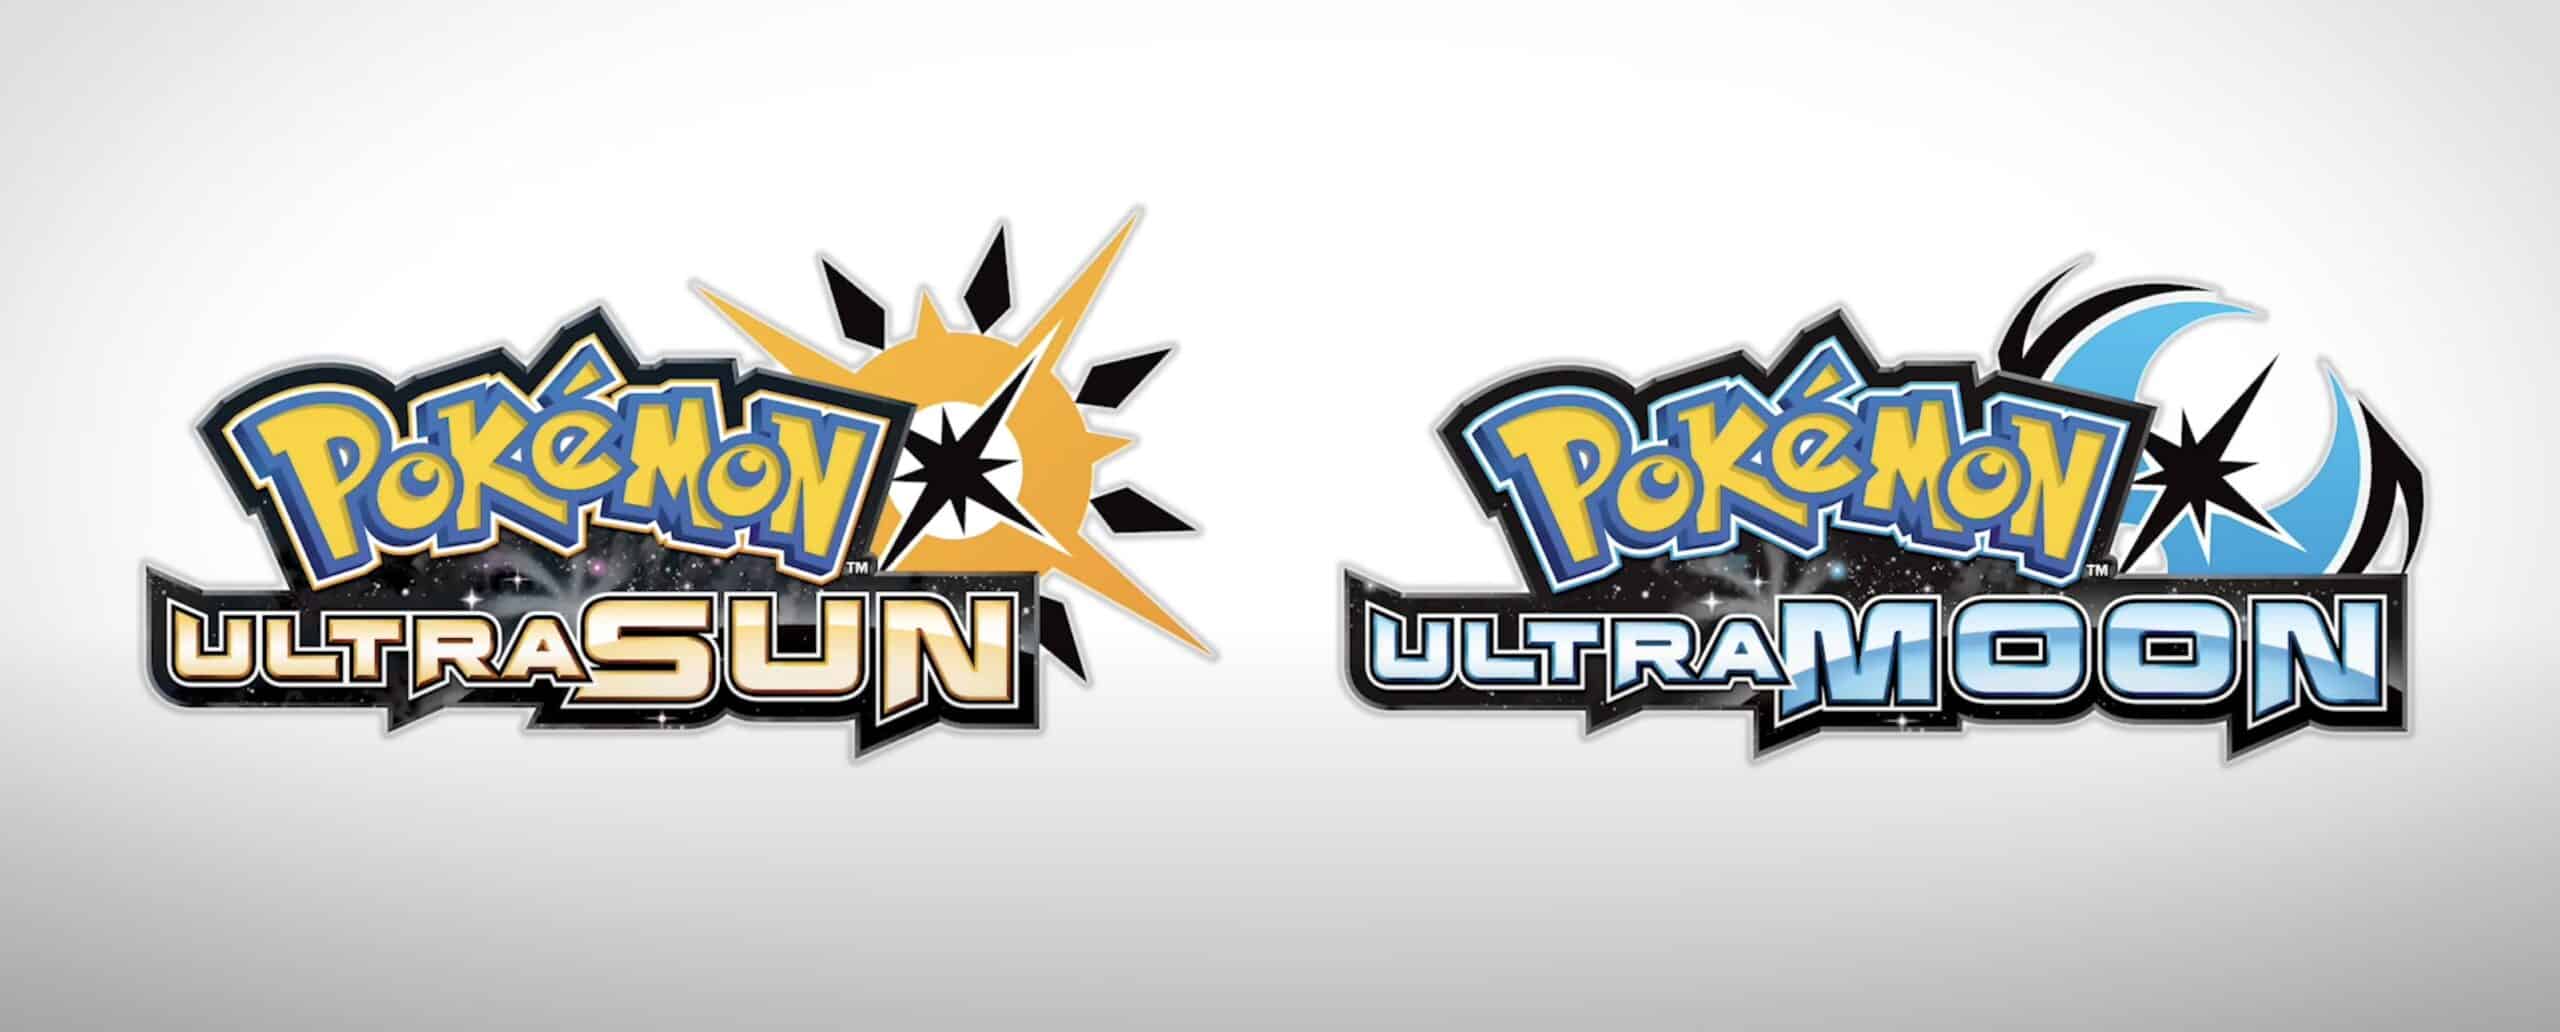 Pokémon fans are in love with Ultra Sun and Ultra Moon's cutest